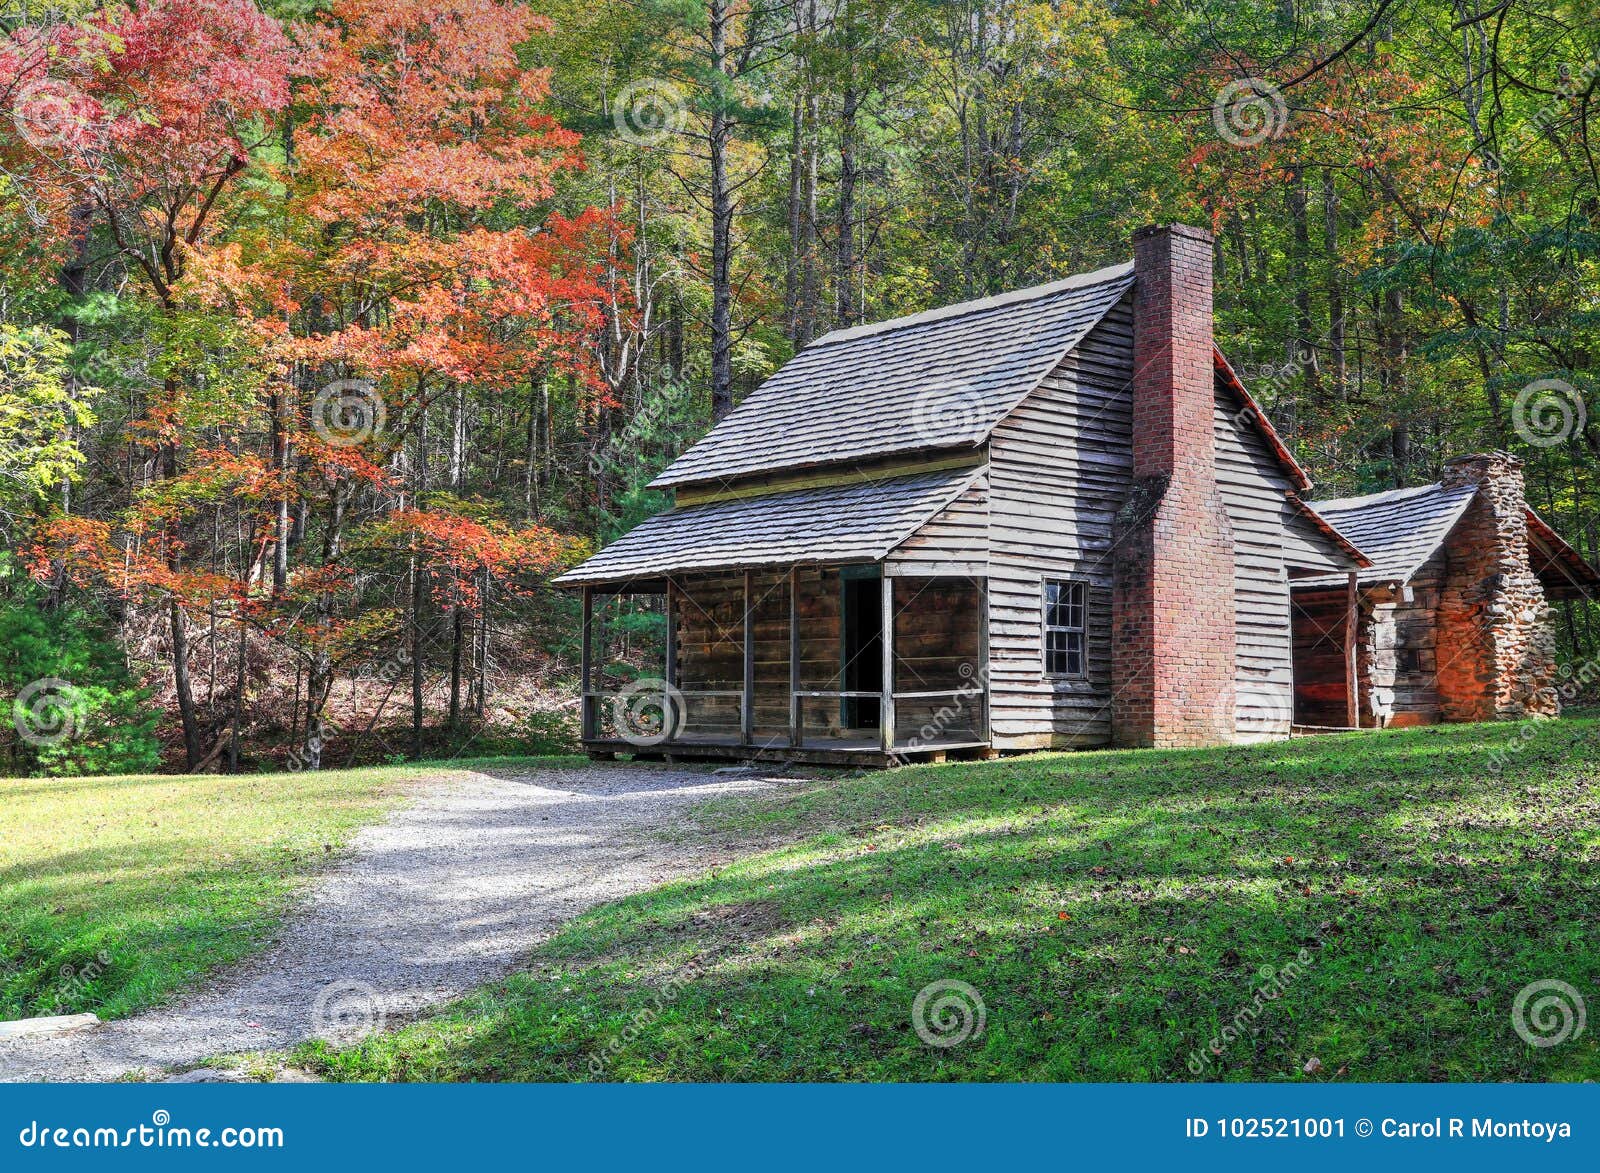 henry whitehead place in cades cove